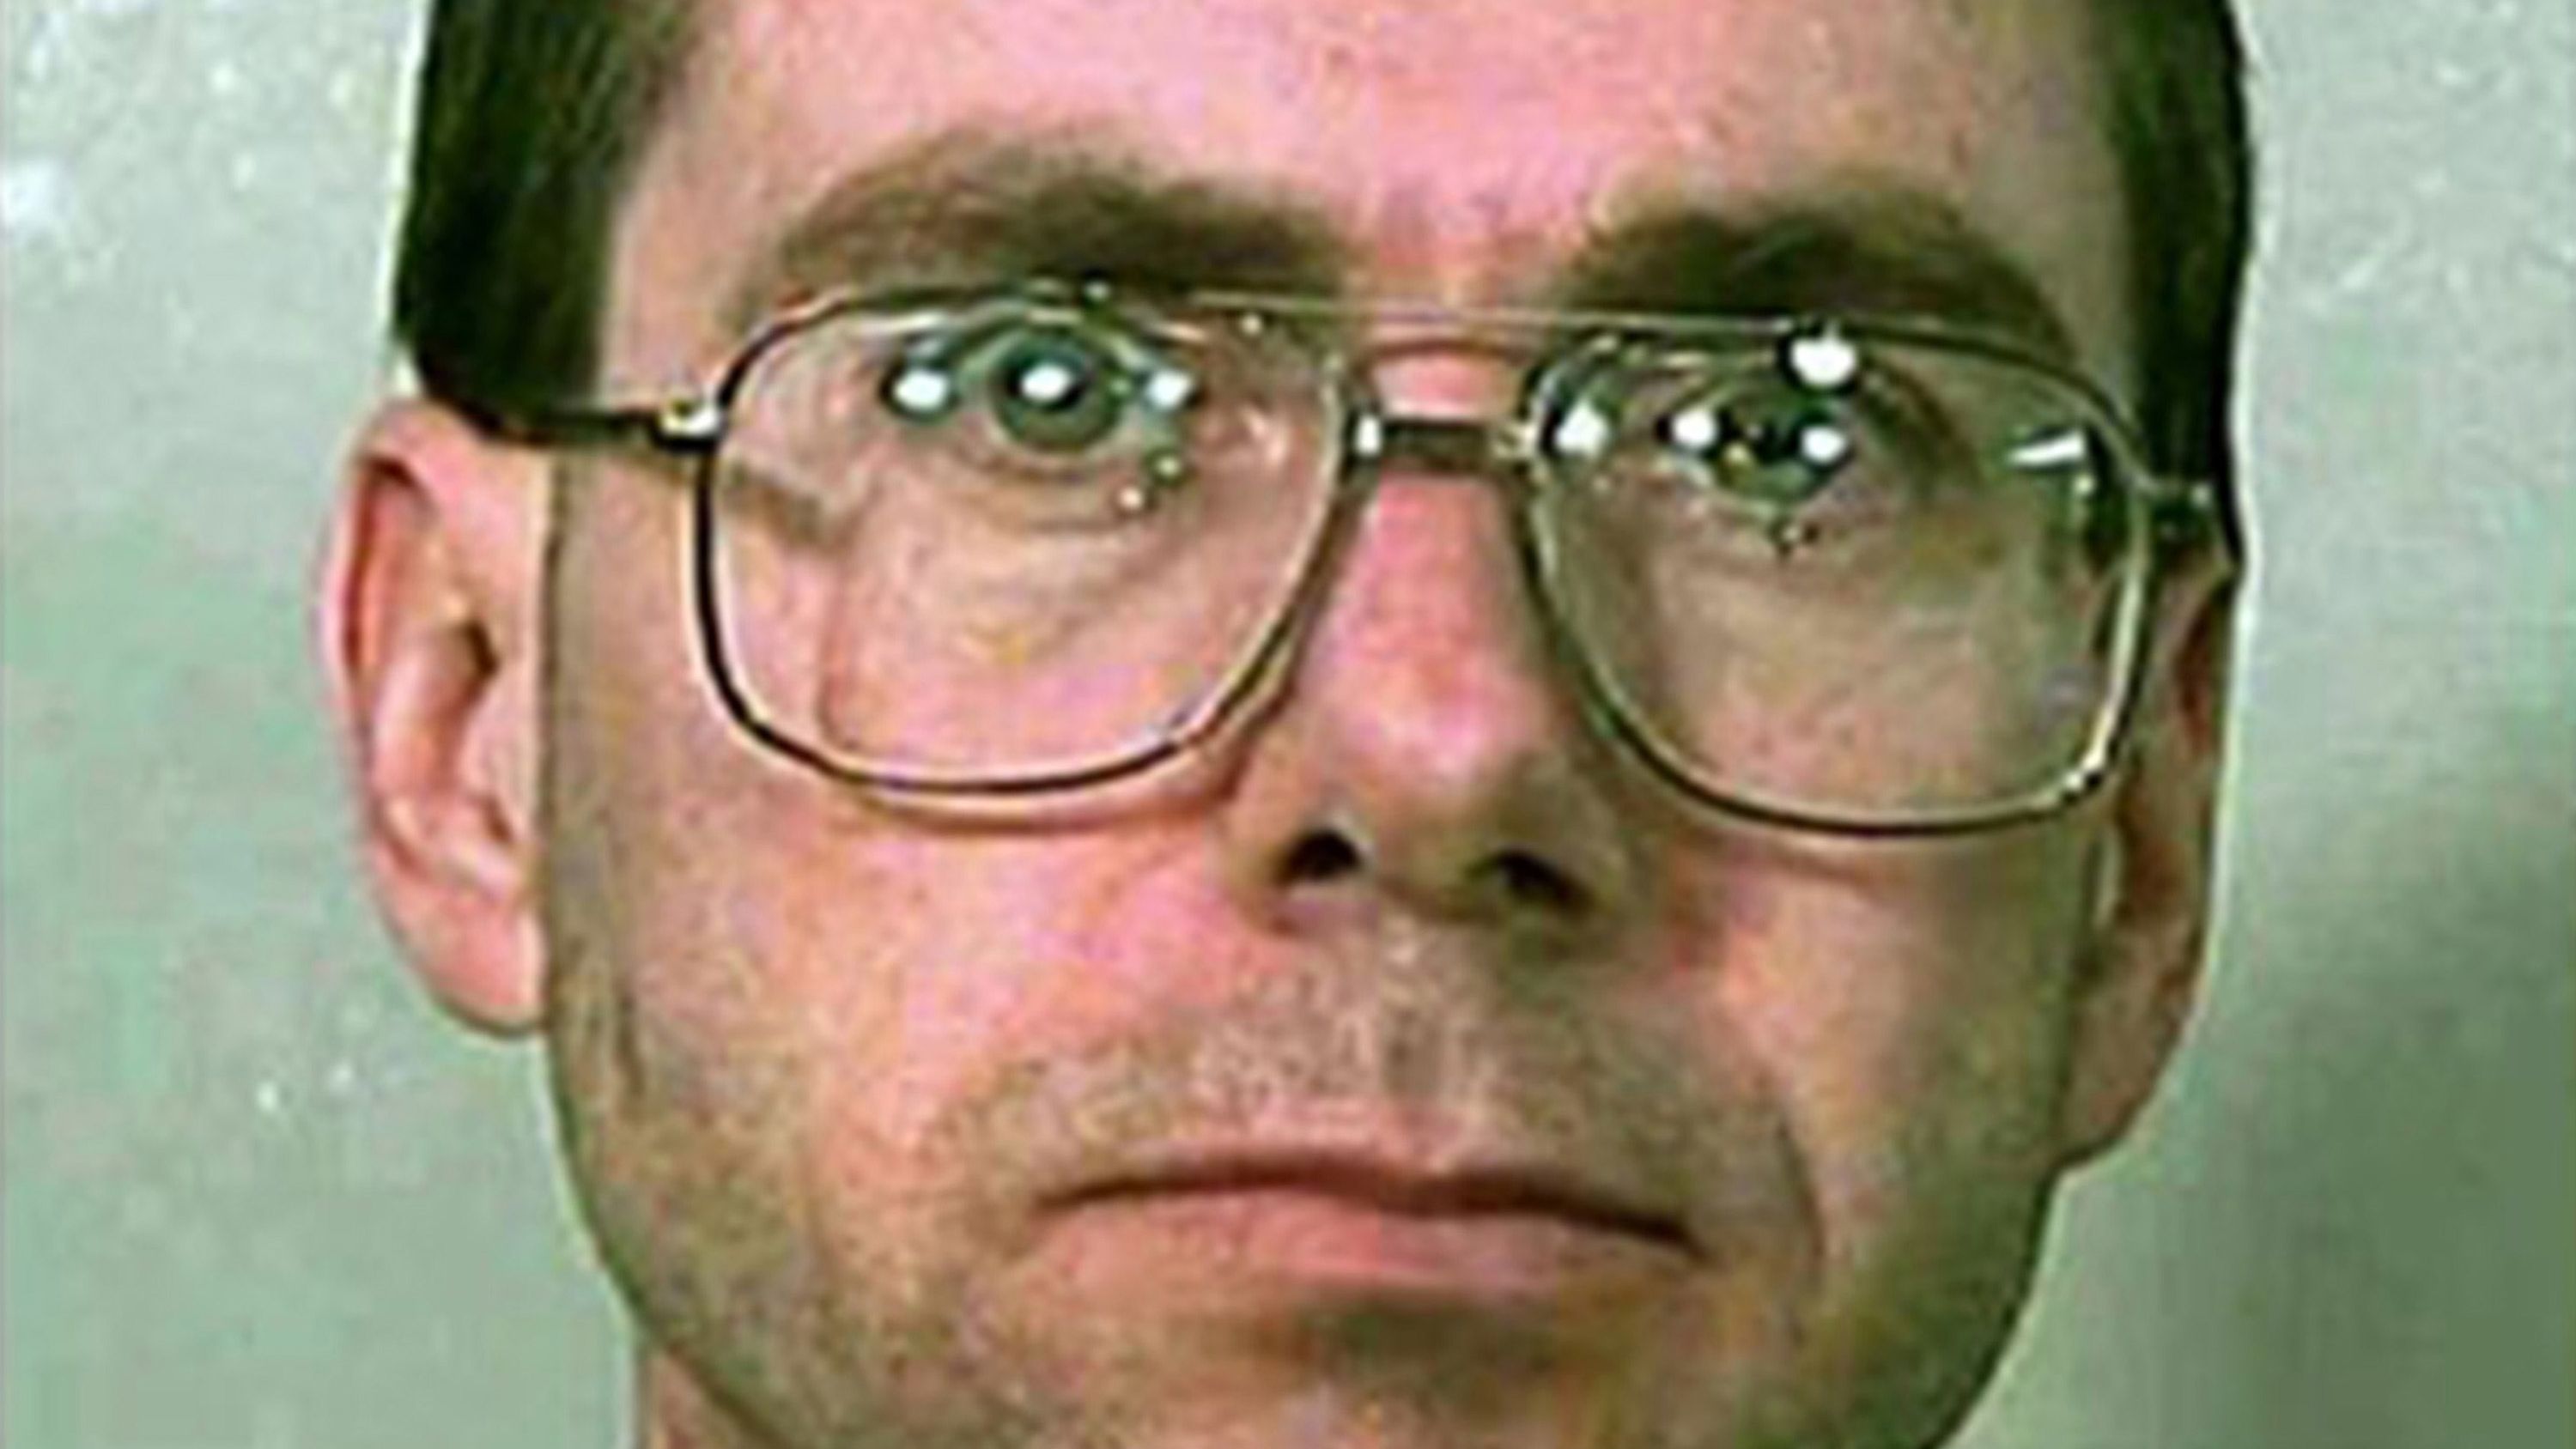 <a href="https://www.cnn.com/2013/03/25/us/terry-nichols-fast-facts/index.html" target="_blank">Terry Nichols</a> was convicted of being an accomplice to Timothy McVeigh in the 1995 Oklahoma City bombing that killed 168 people. Judges sentenced him to life in prison in federal and state trials.